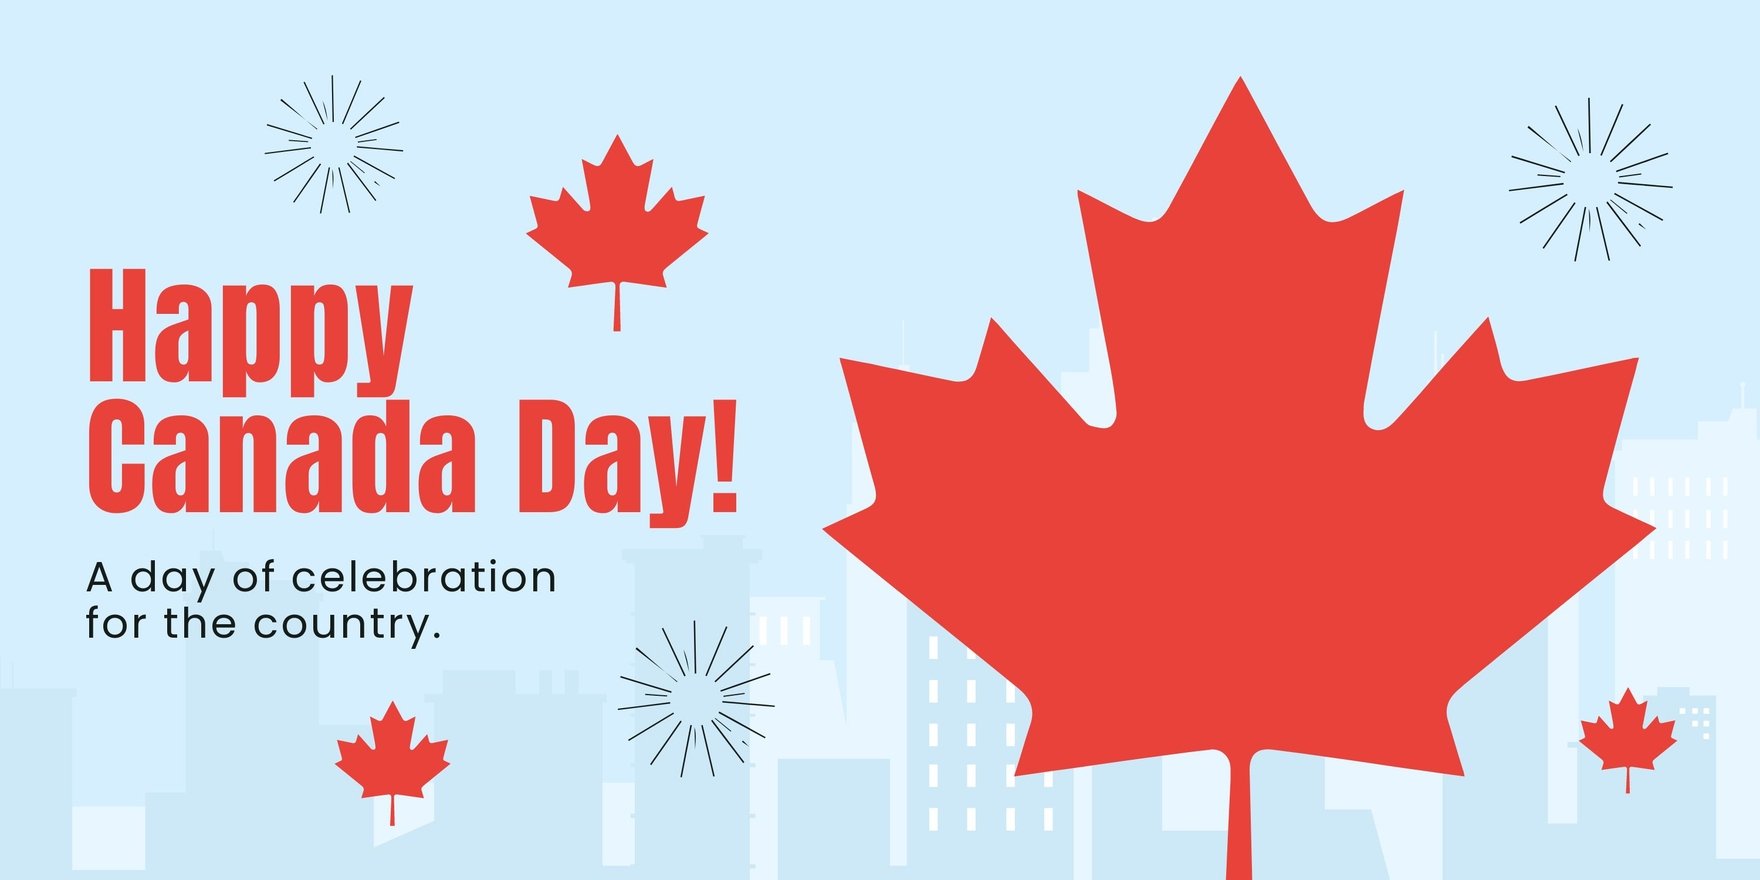 Free Happy Canada Day Banner in Word, Google Docs, Illustrator, PSD, Apple Pages, Publisher, JPG